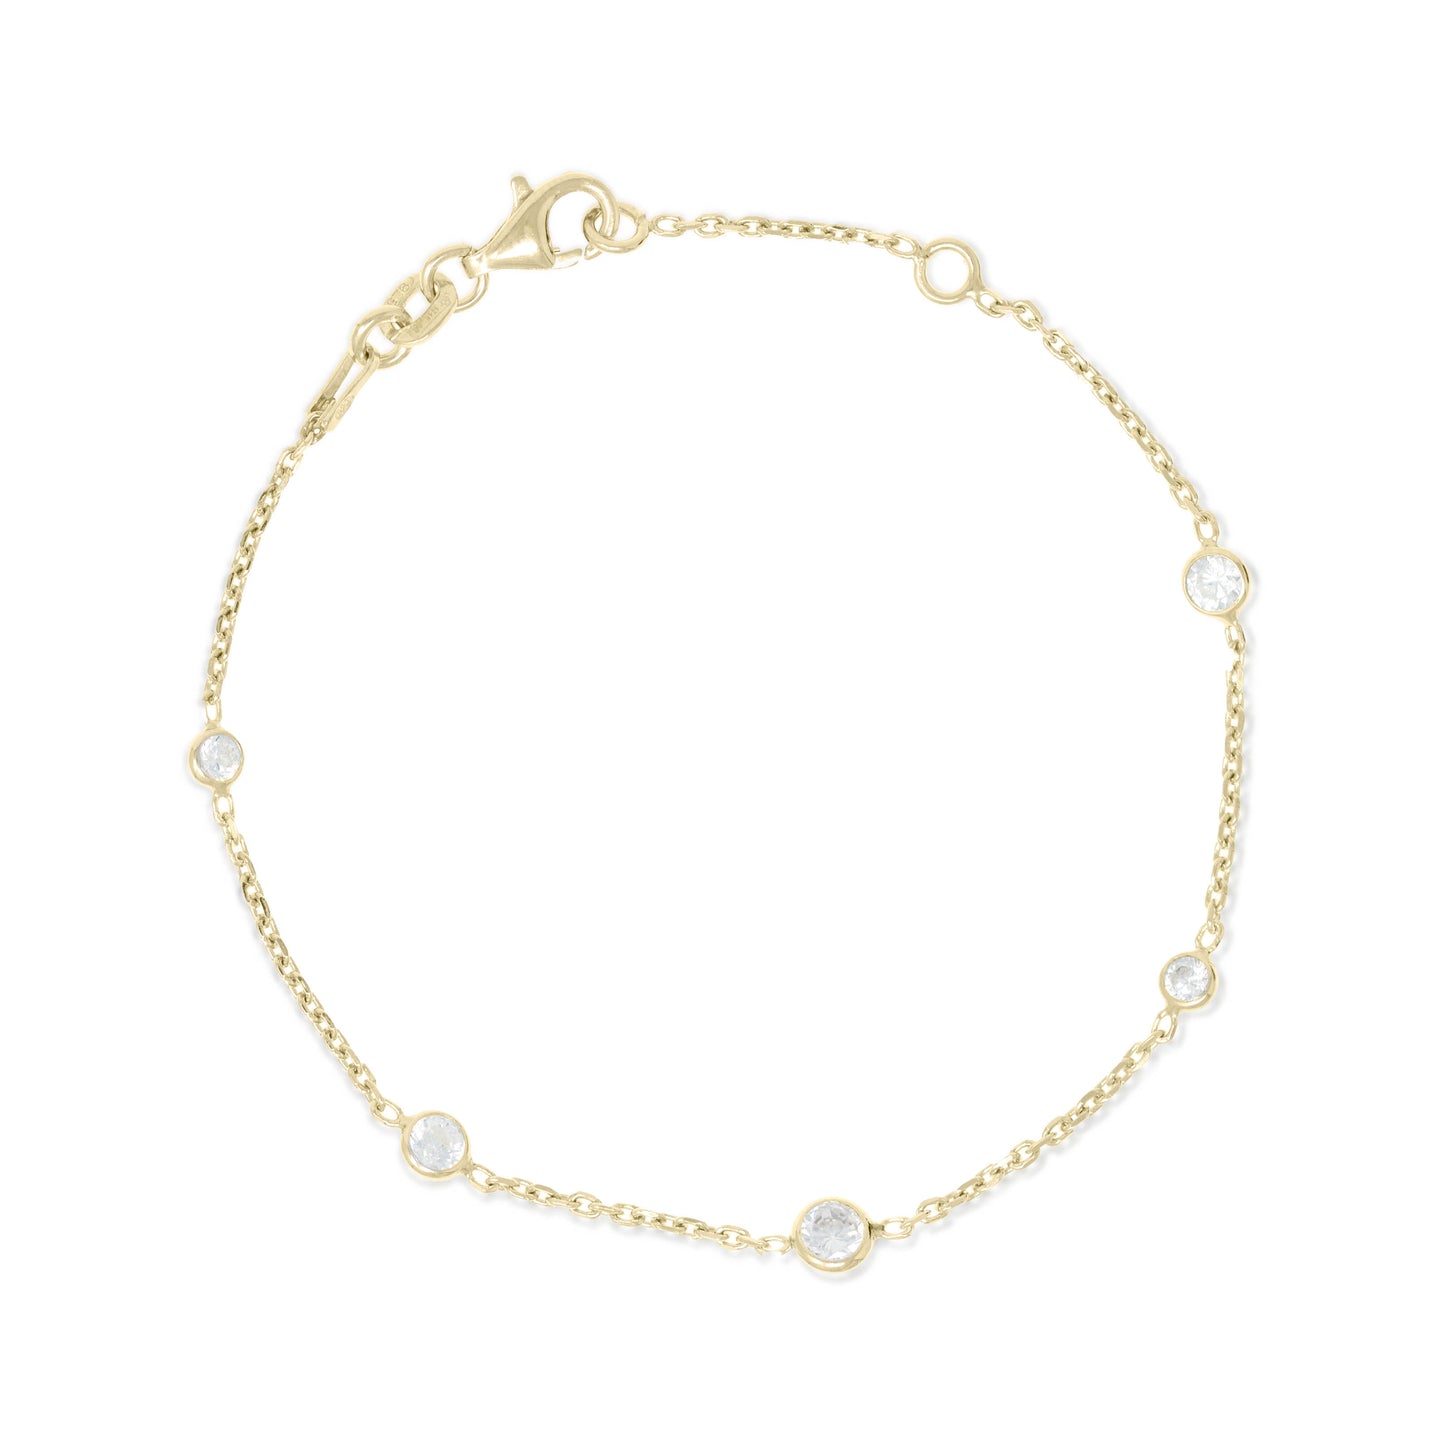 BX-31/CH/G - Gold Chain and Cubic Zirconia Bracelet